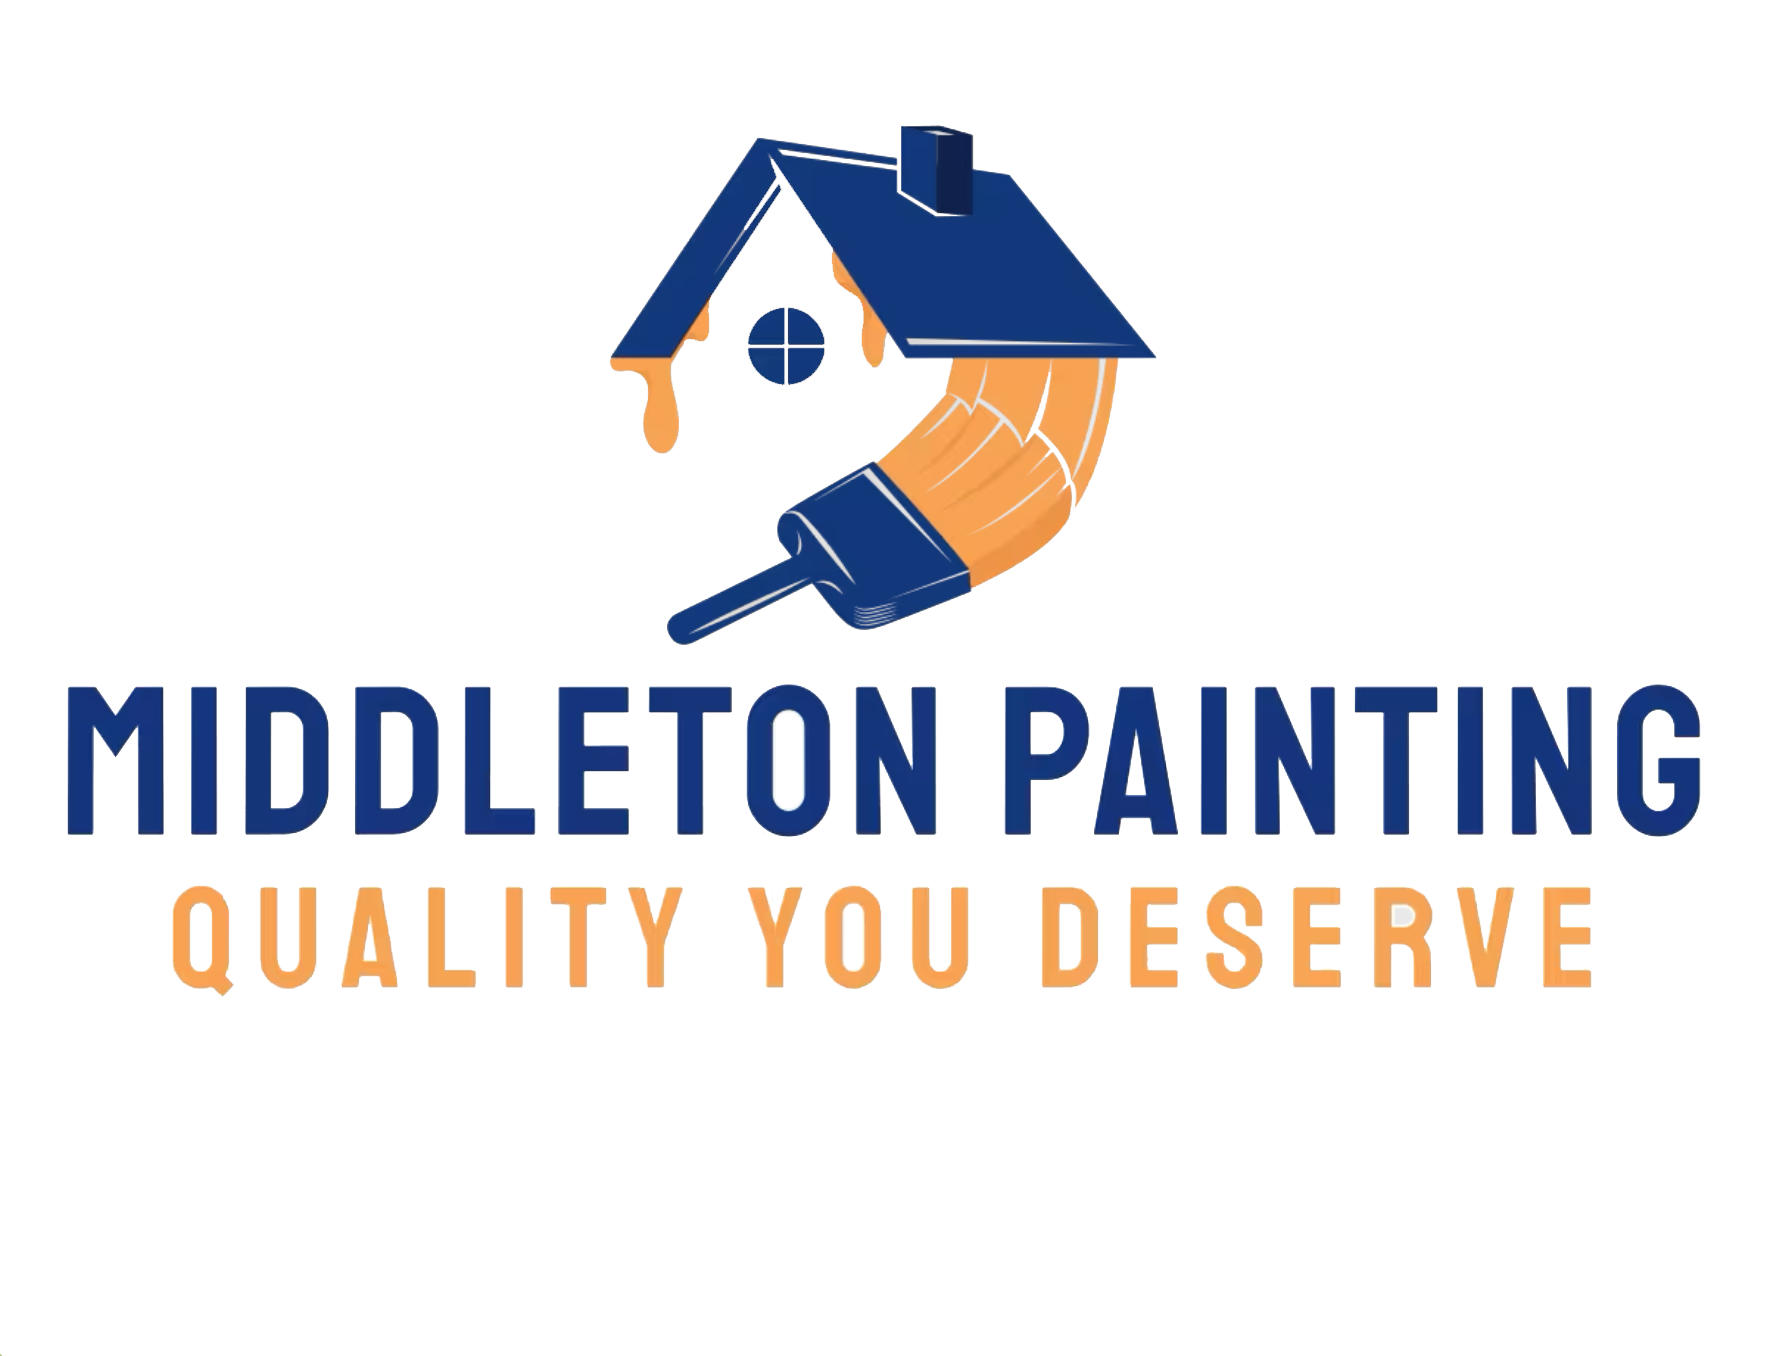 Middleton Painting Explains How Transform Businesses in the Memphis Area